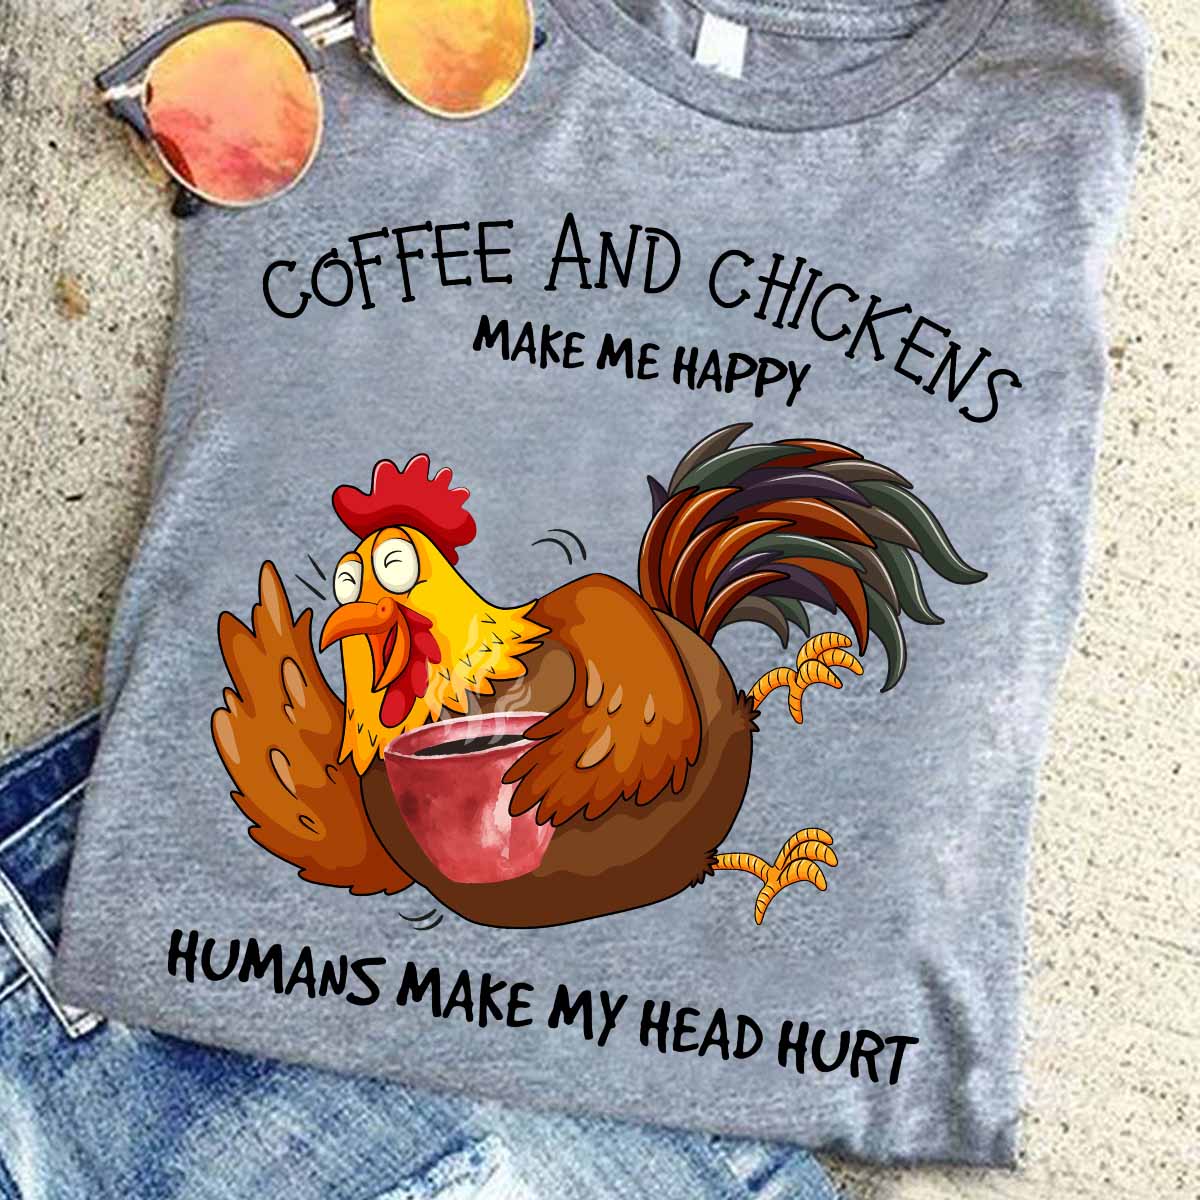 Coffee and chickens make me happy humans make my head hurt